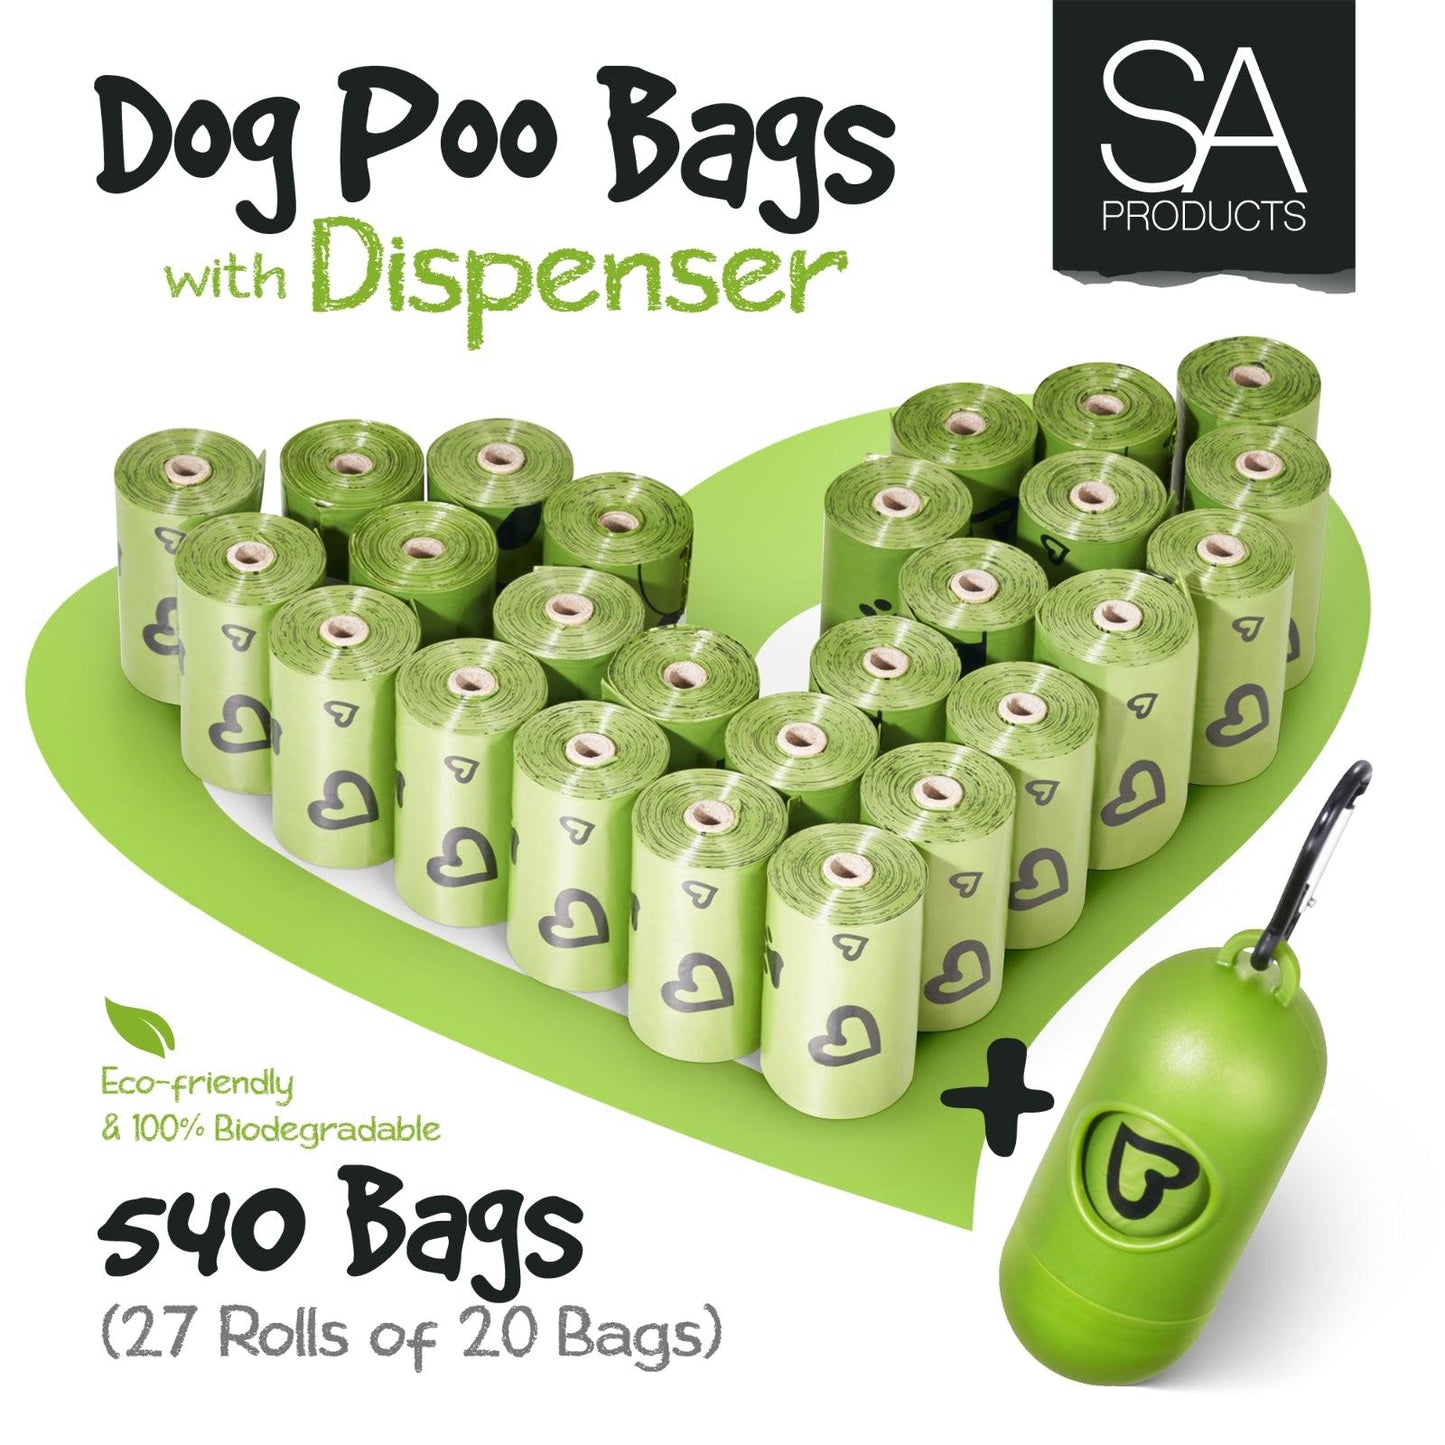 Large Dog Poop Bags - 540 Count: Strong, Eco-Friendly Solution - Click